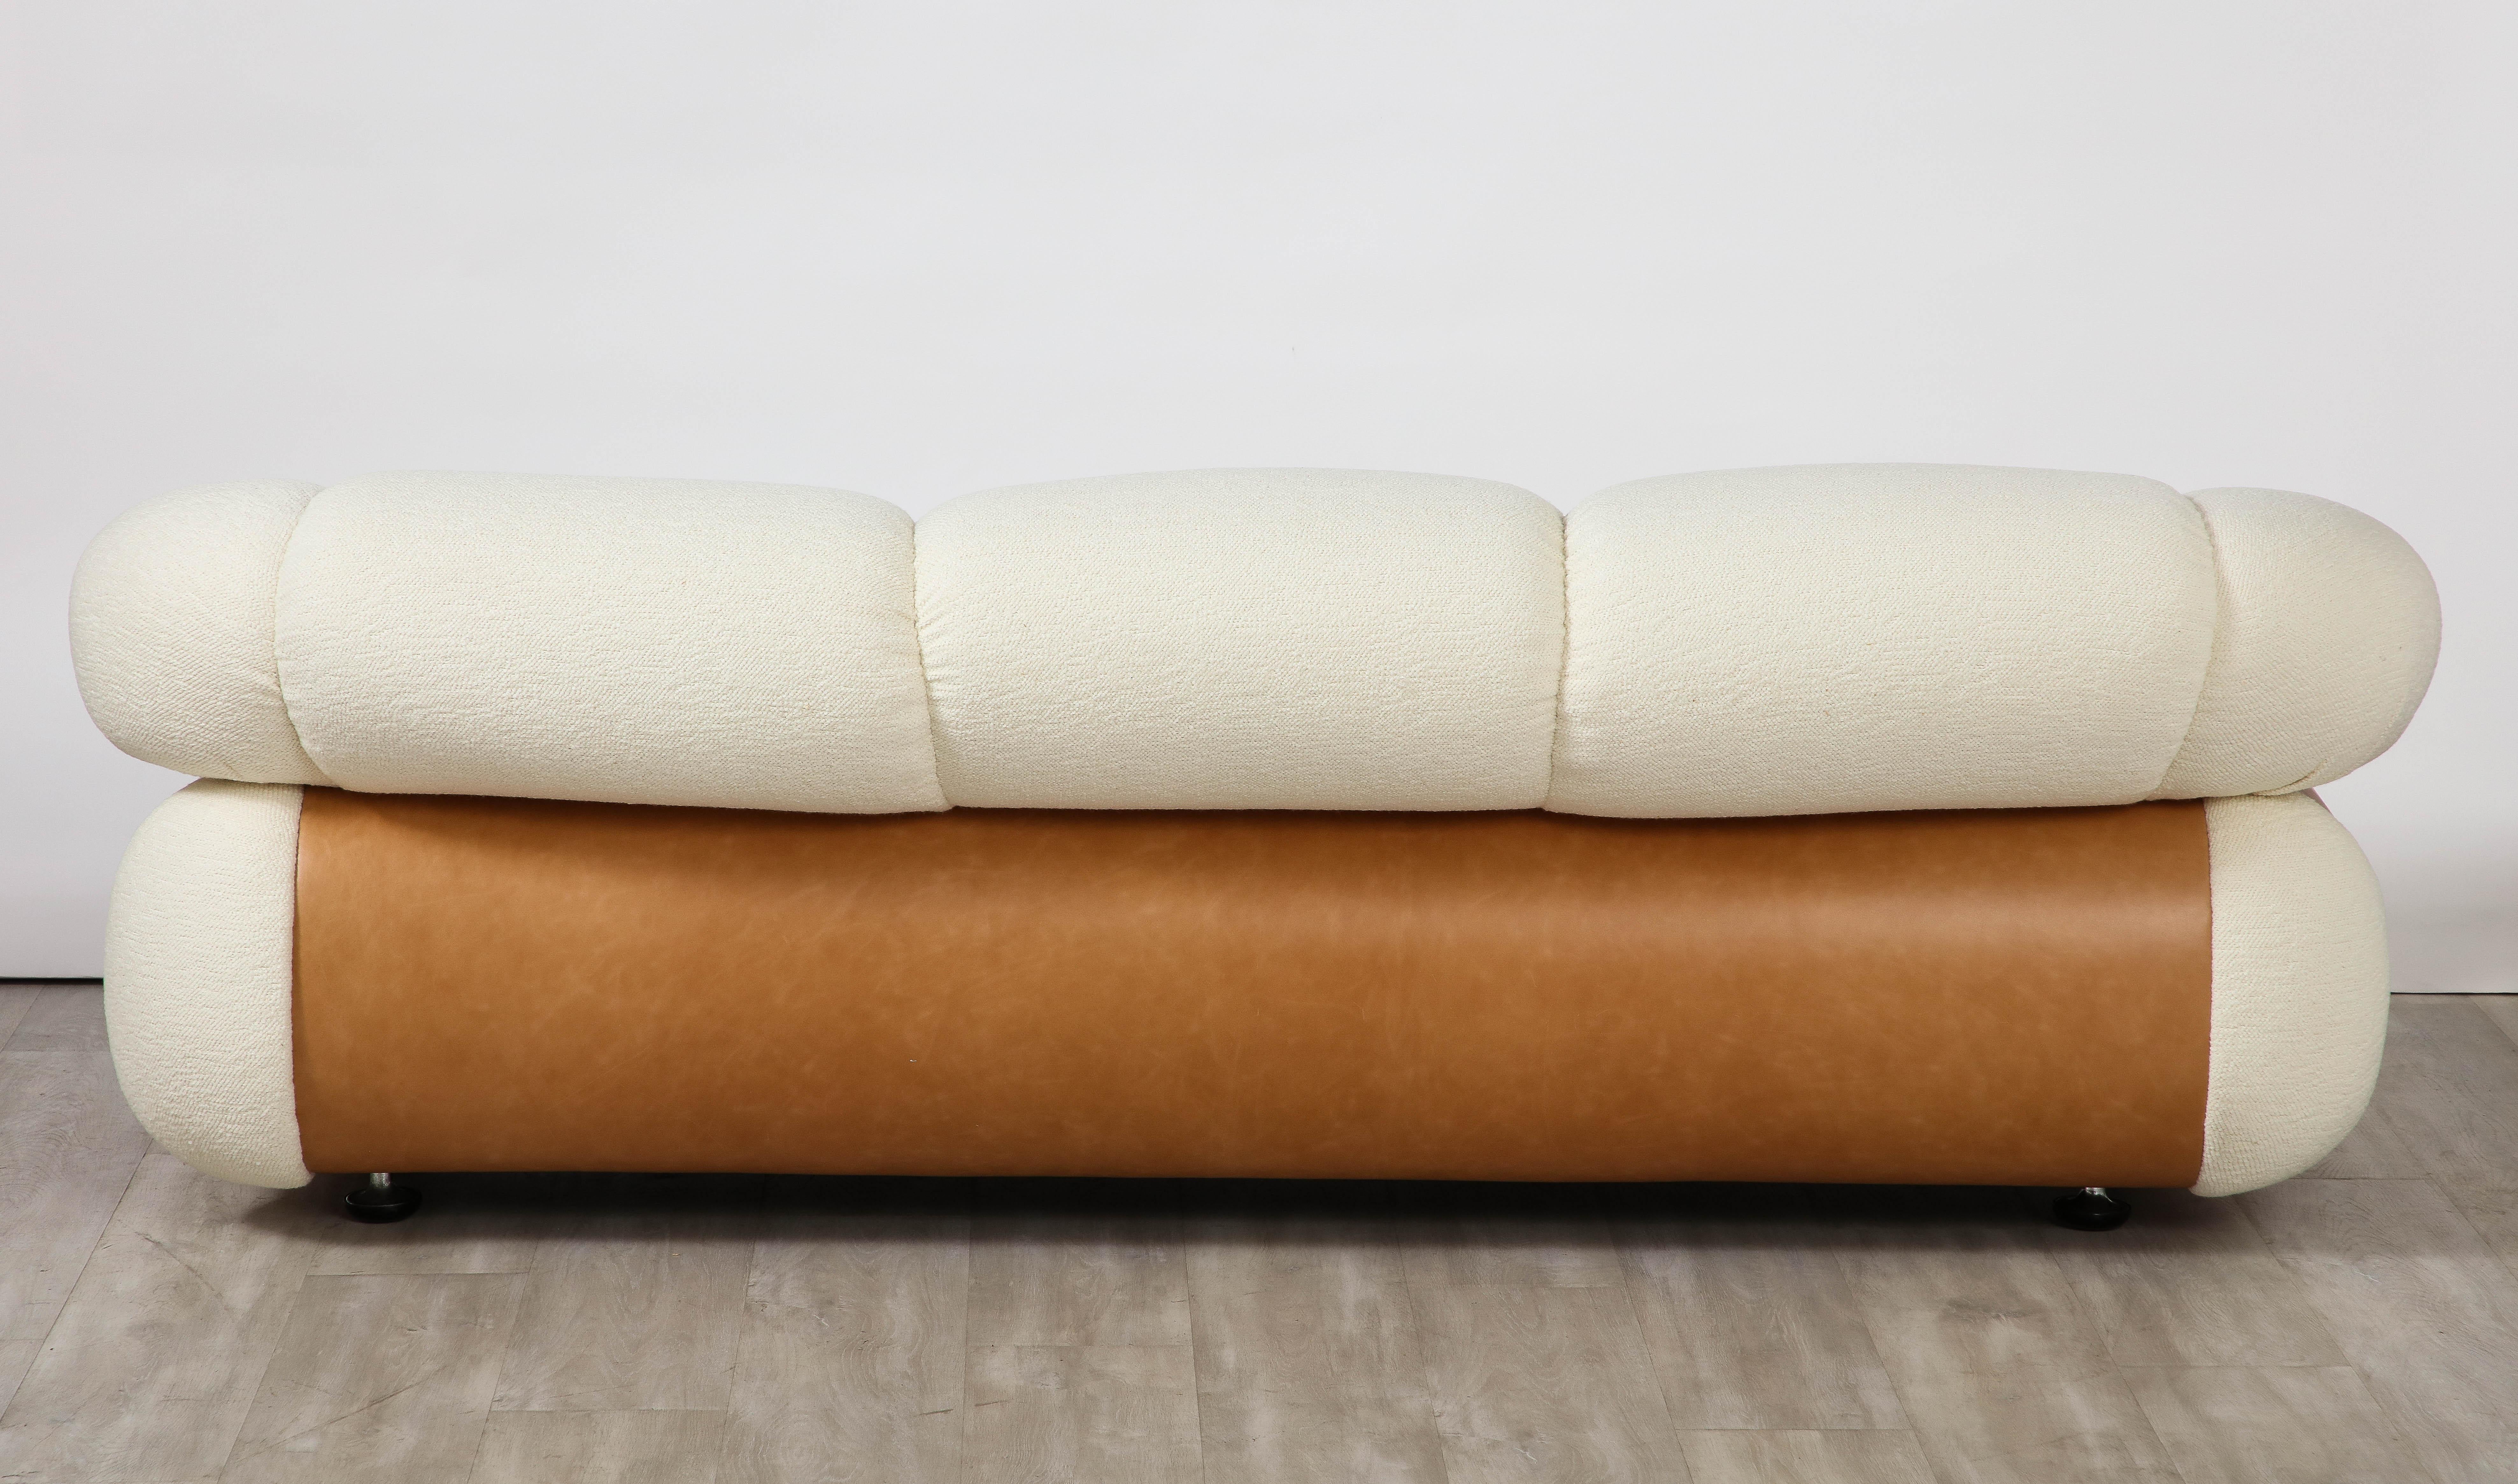 Adriano Piazzesi Italian 1970's Channel Tufted Sofa For Sale 4